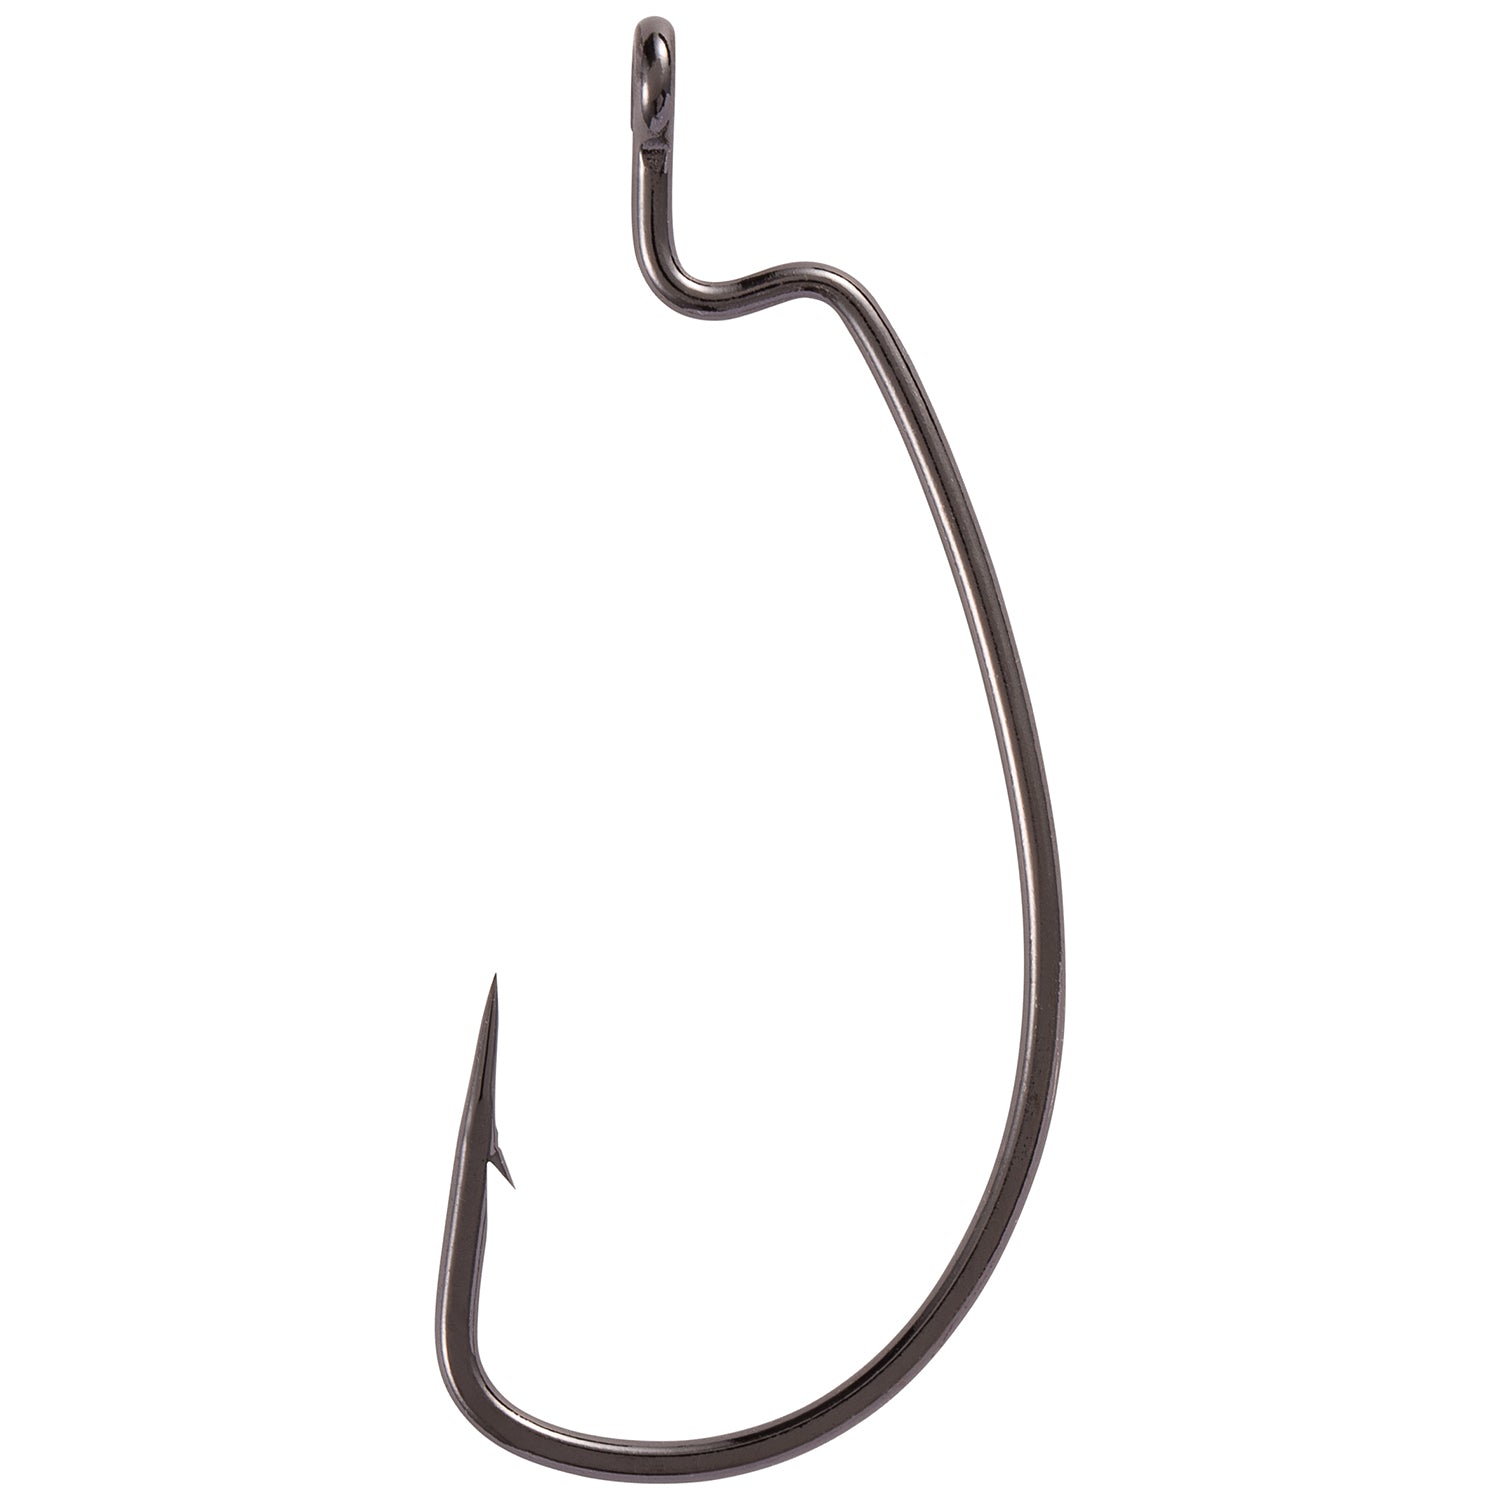 Ewg-Hooks-for-Bass-Fishing-Texas-Rig-Hooks -Offset-Extra-Wide-Gap-Plastic-Worm-Hook Set Freshwater Bass Rubber Worms  Bulk Big Fish Swim Bait Lures Hook Kit 1/0 2/0 3/0 4/0 5/0 6/0 (4/0 25  Pack) : : Sports, Fitness & Outdoors